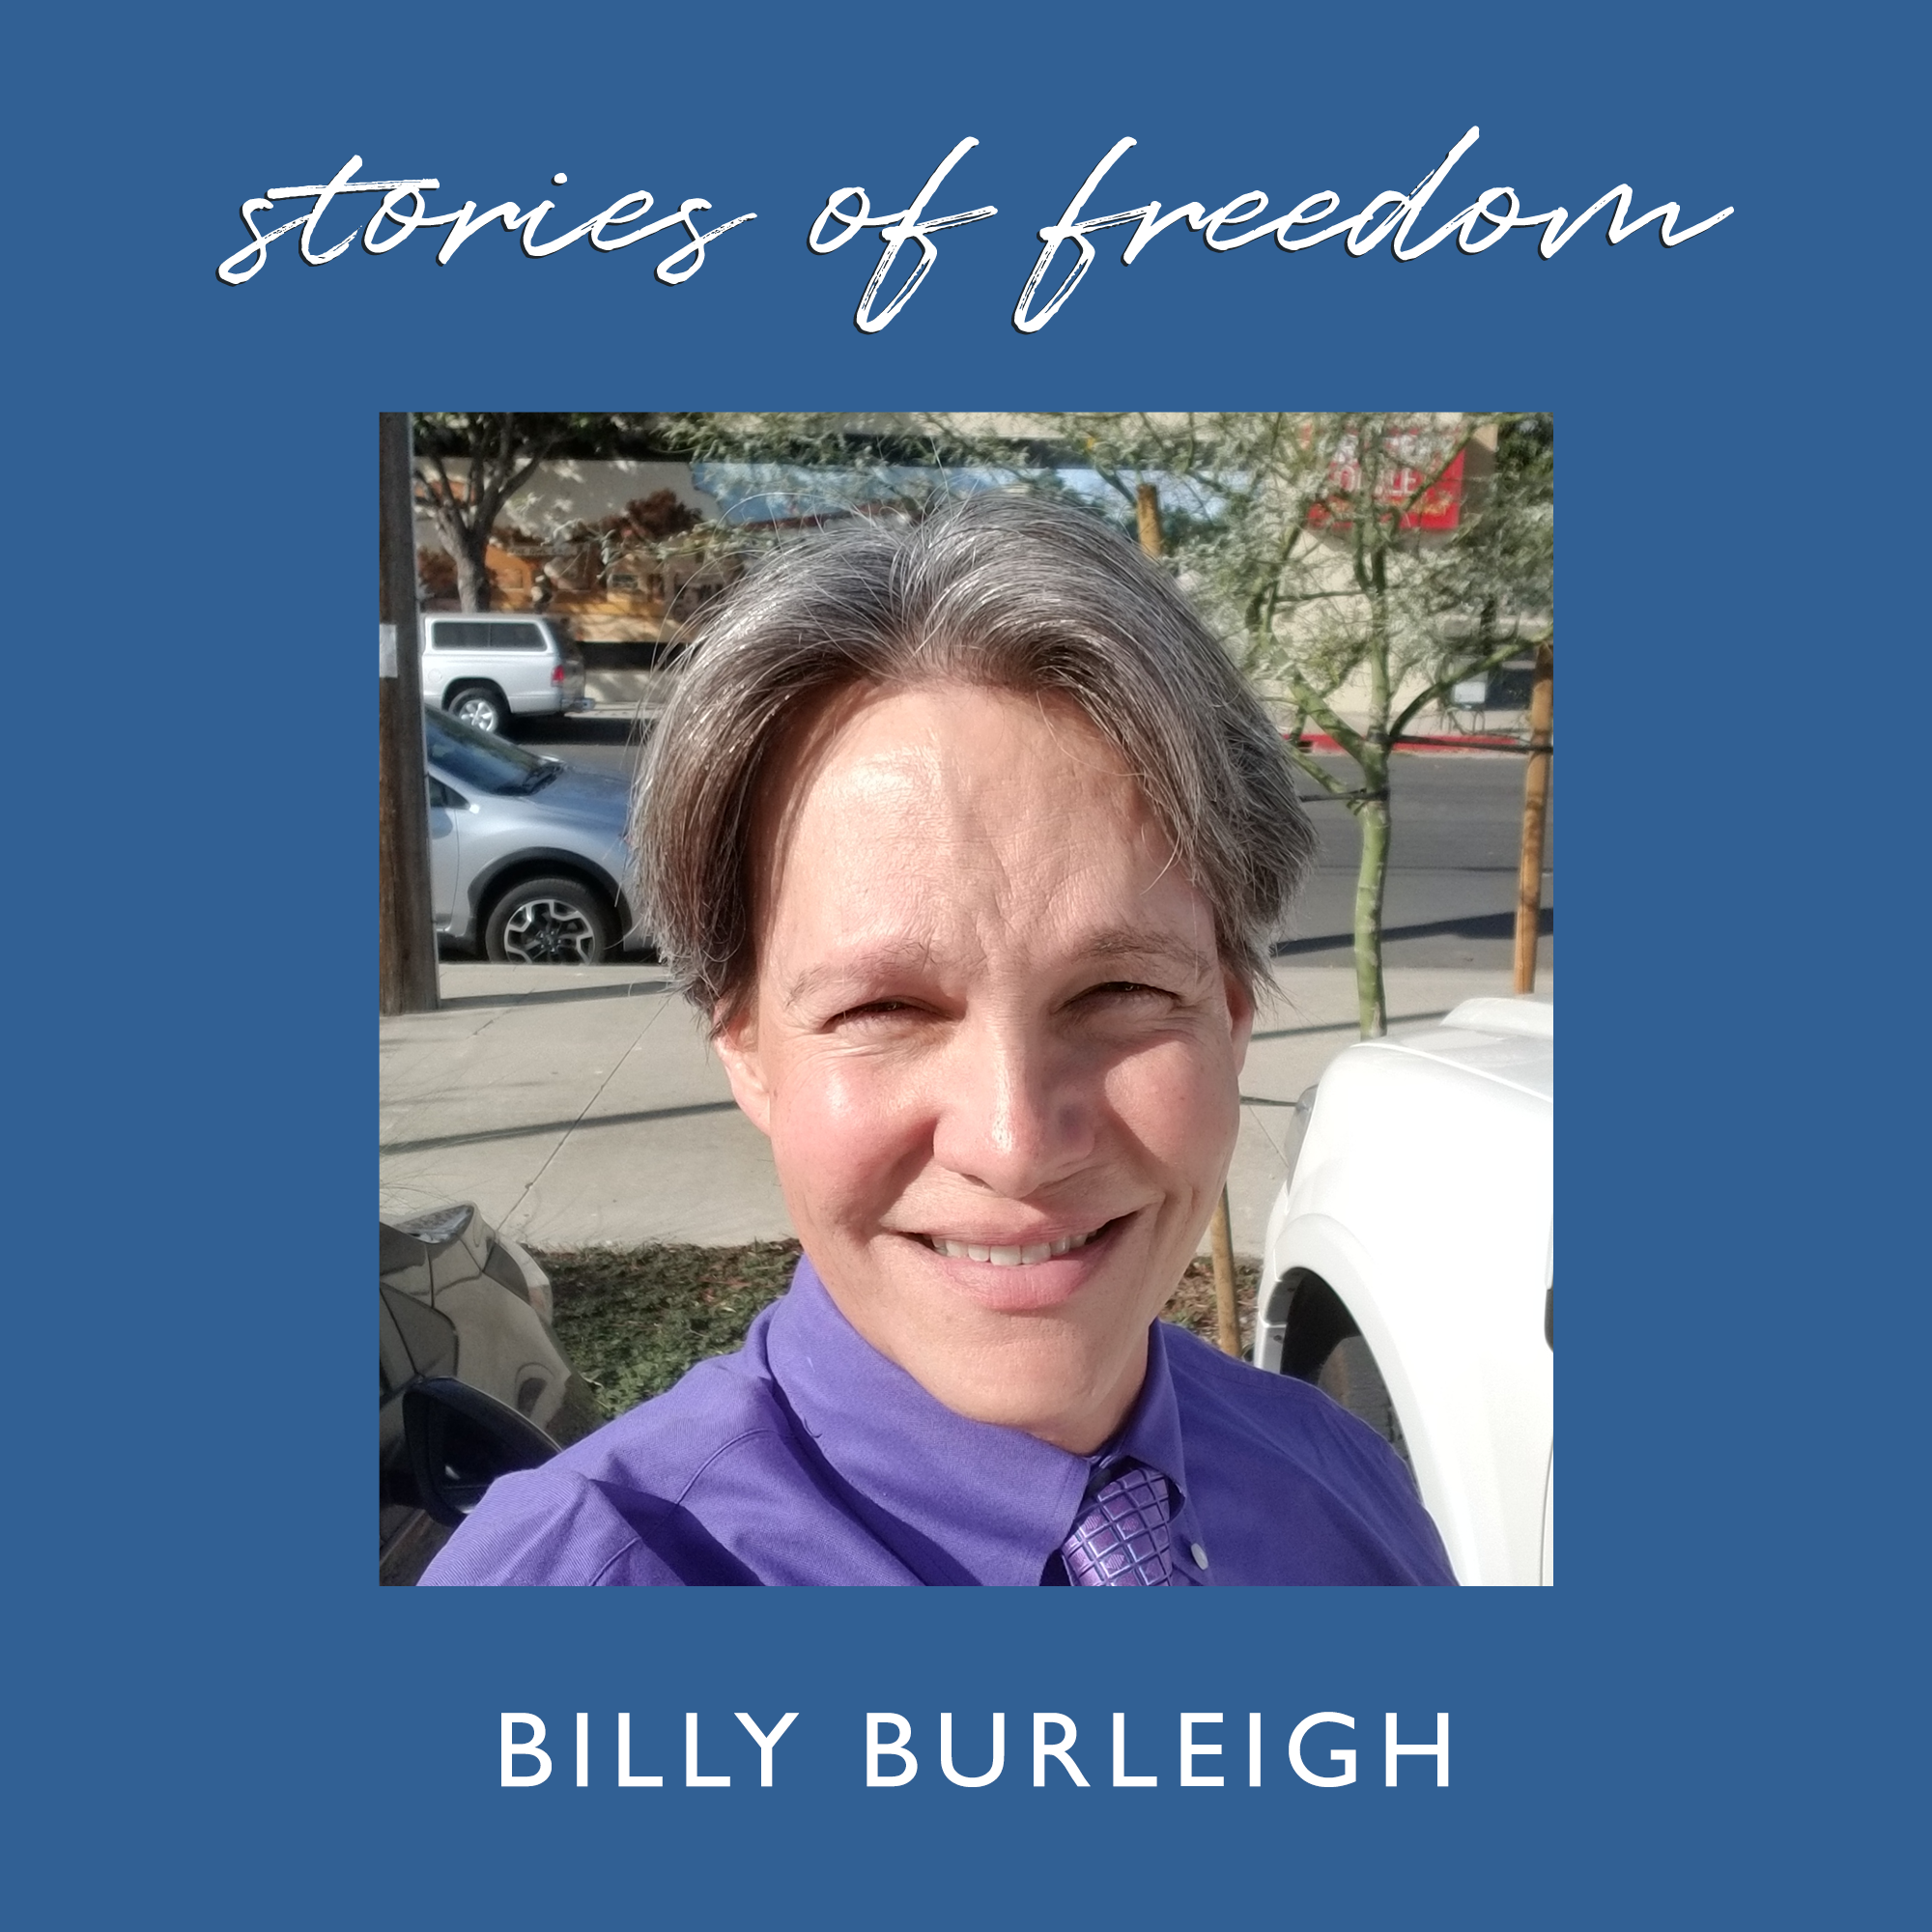 Billy Burleigh: Leaving Transgenderism and Finding His Identity in Christ